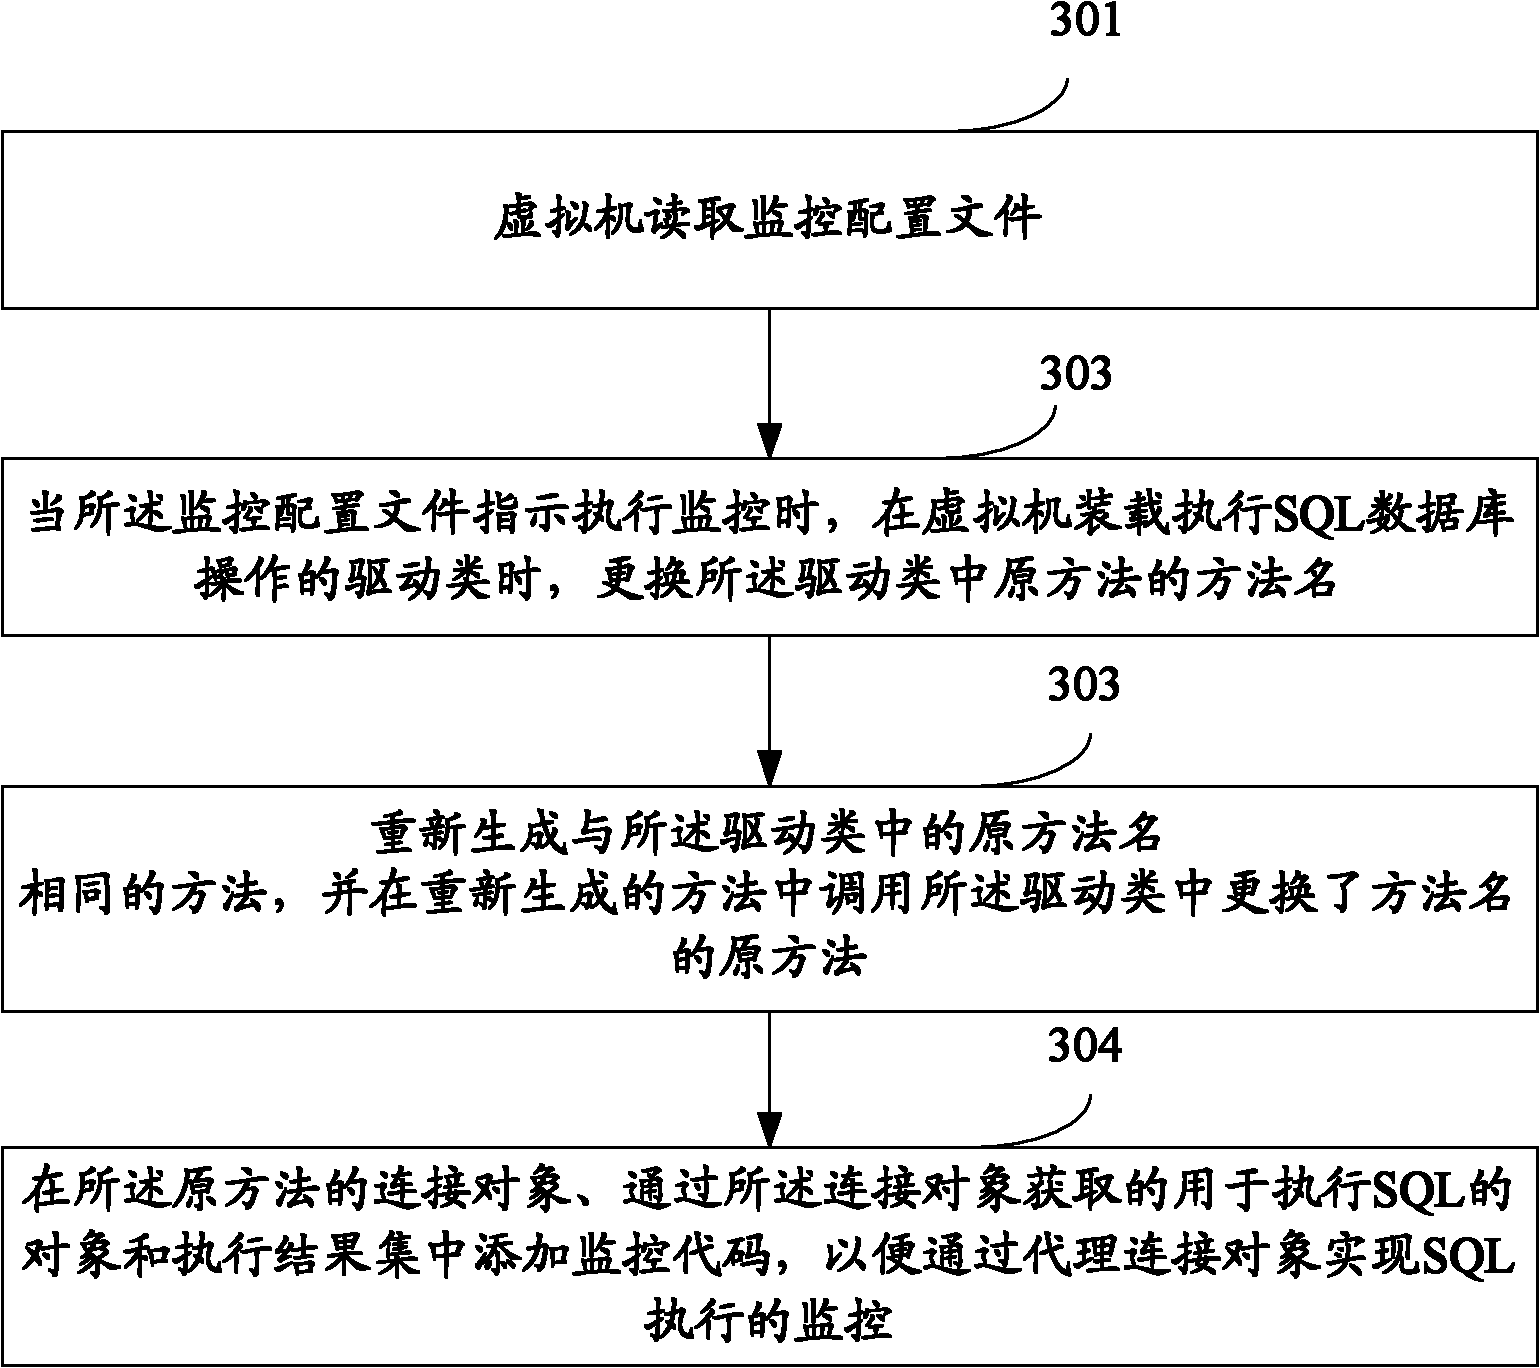 Method and device for realizing monitoring on SQL (structured query language) database